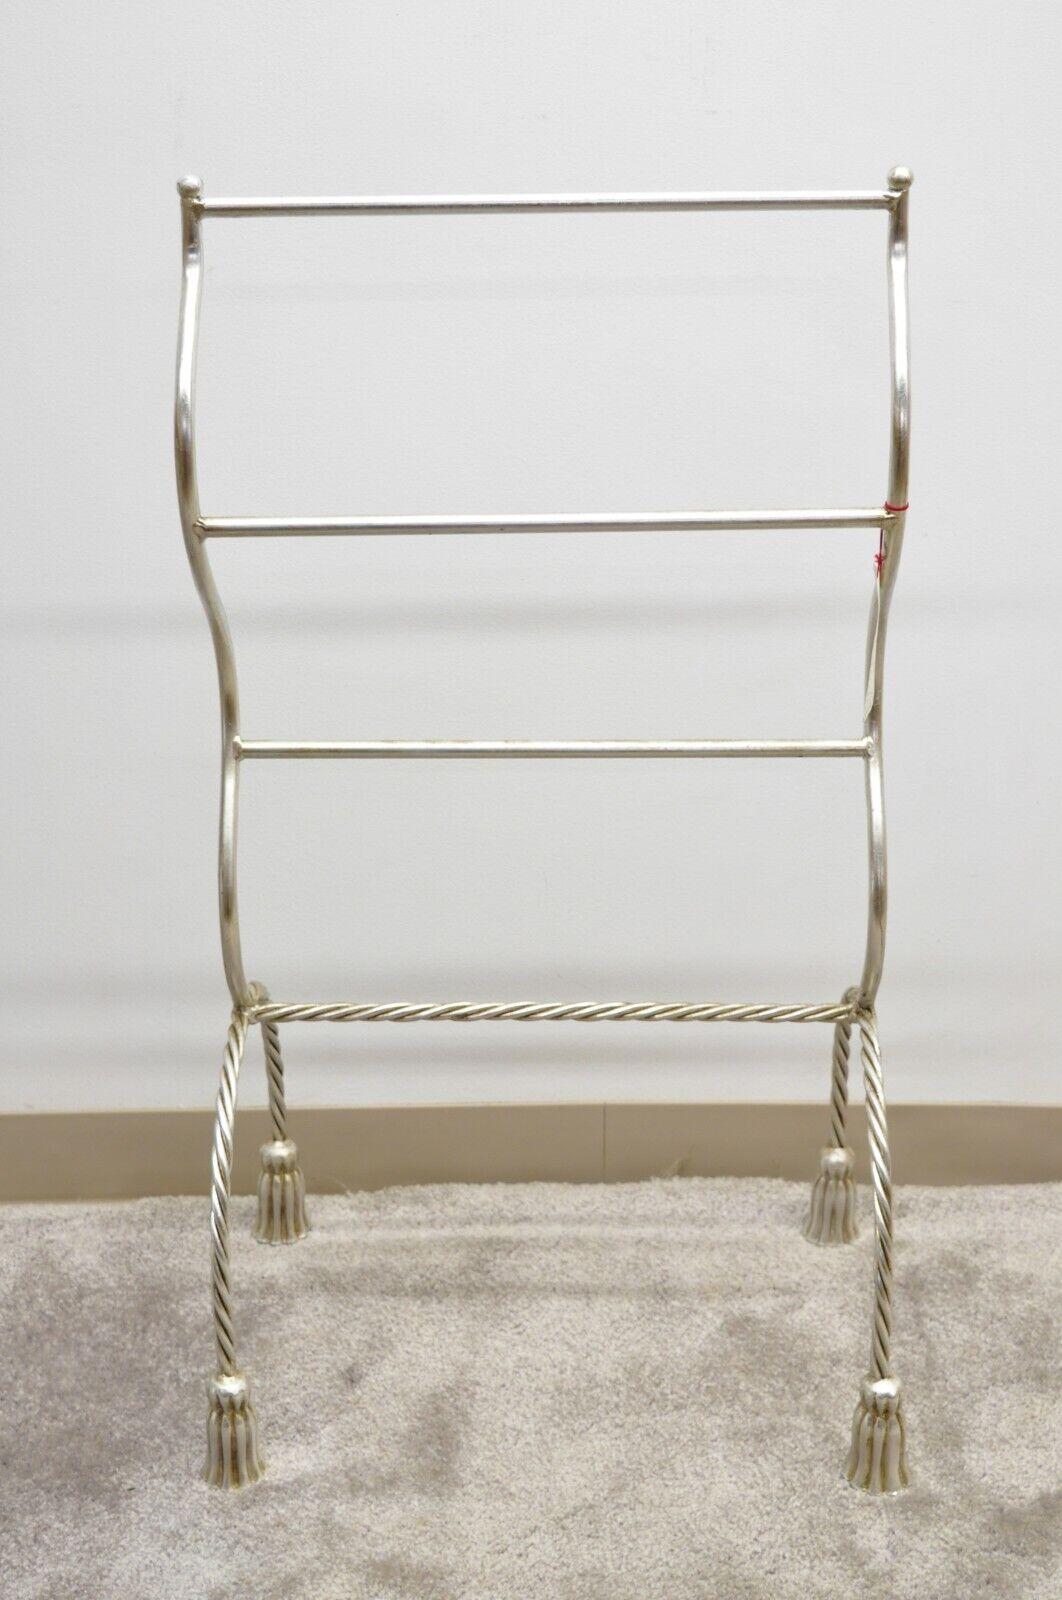 Vintage Italian Hollywood Regency Silver Gilt Metal Iron Towel Rack with Tassel Feet. Item features a silver gilt finish, sculptural metal frame, tassel form feet, original label, quality Italian craftsmanship, great style and form. circa Mid to